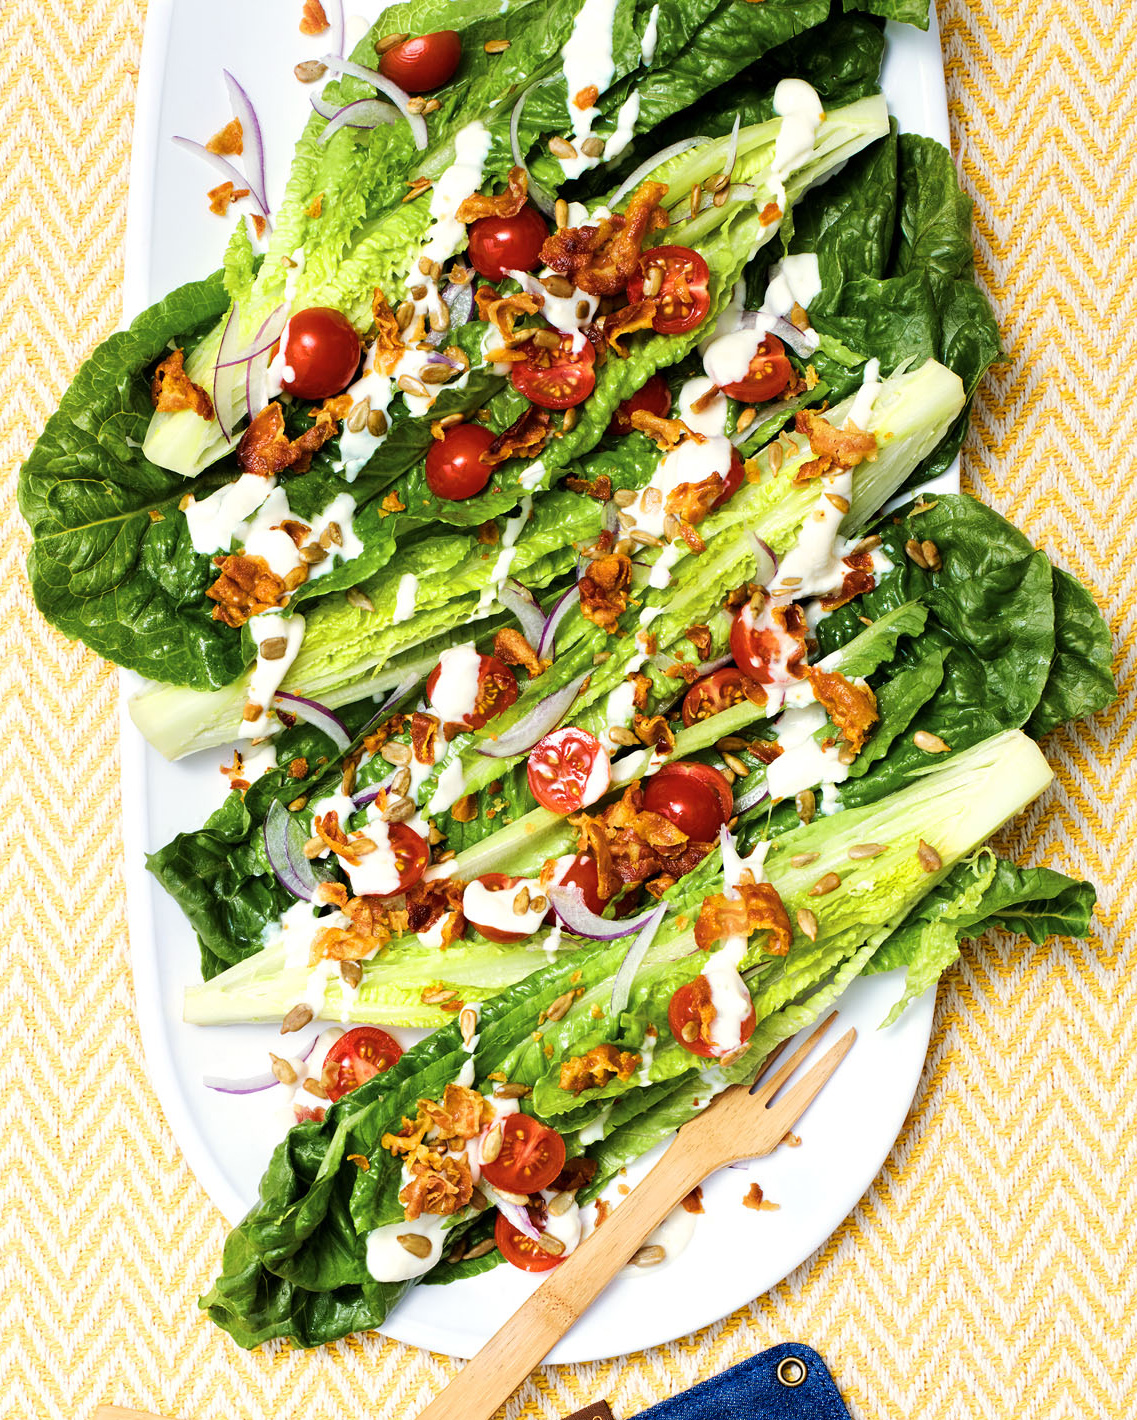 Romaine Wedge Salad with Hearts of Palm Dressing